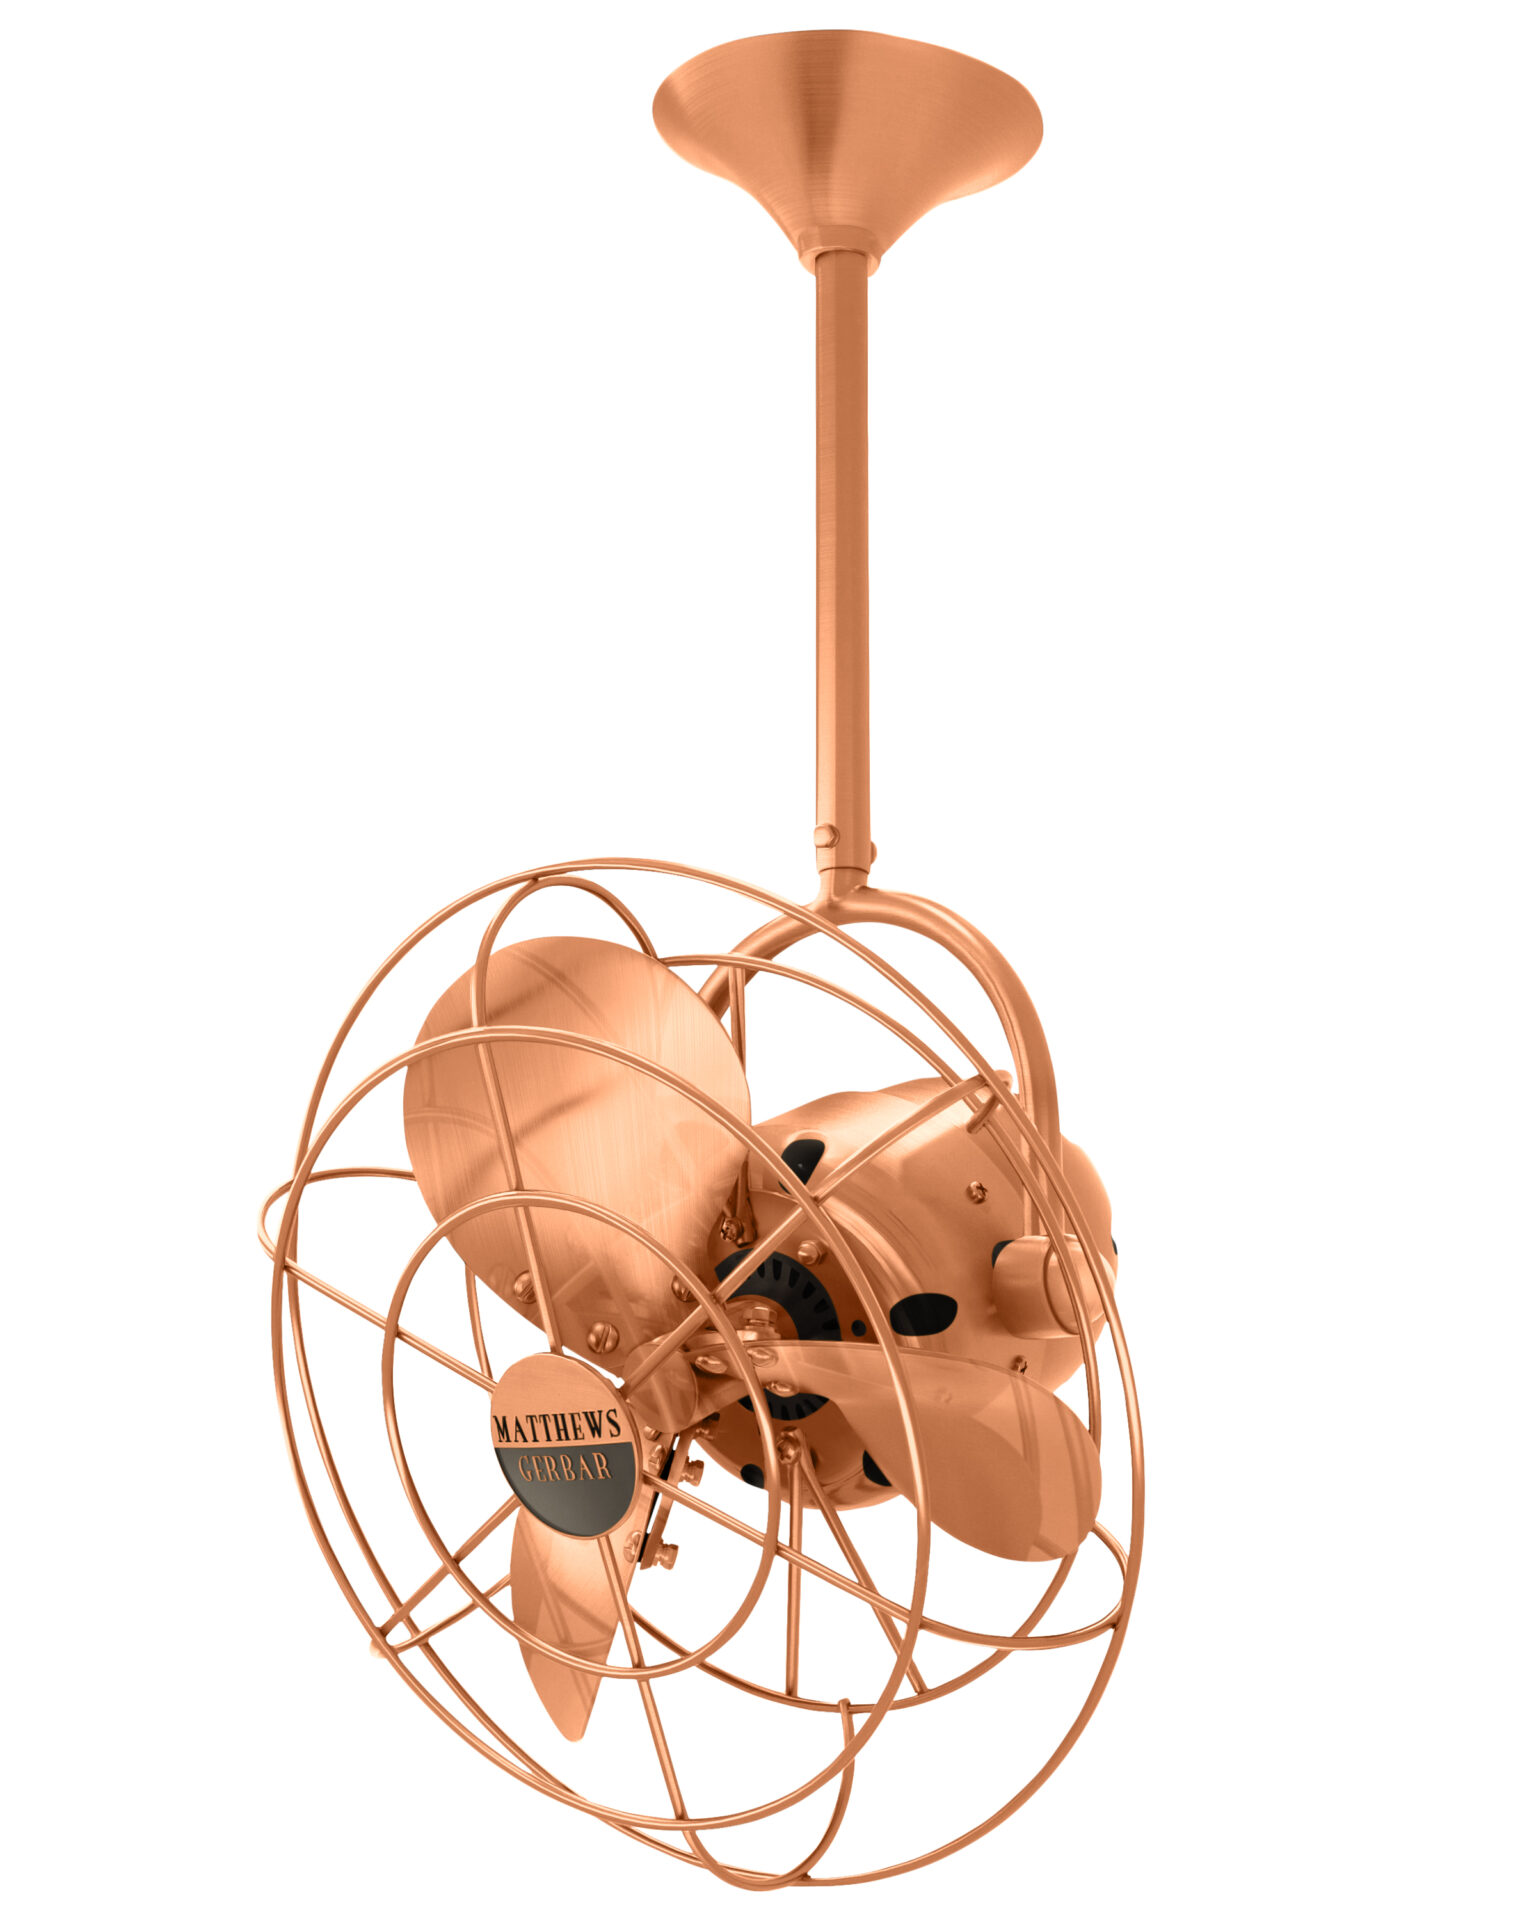 Bianca Direcional ceiling fan in Brushed Copper with metal blades and decorative cage made by Matthews Fan Company.